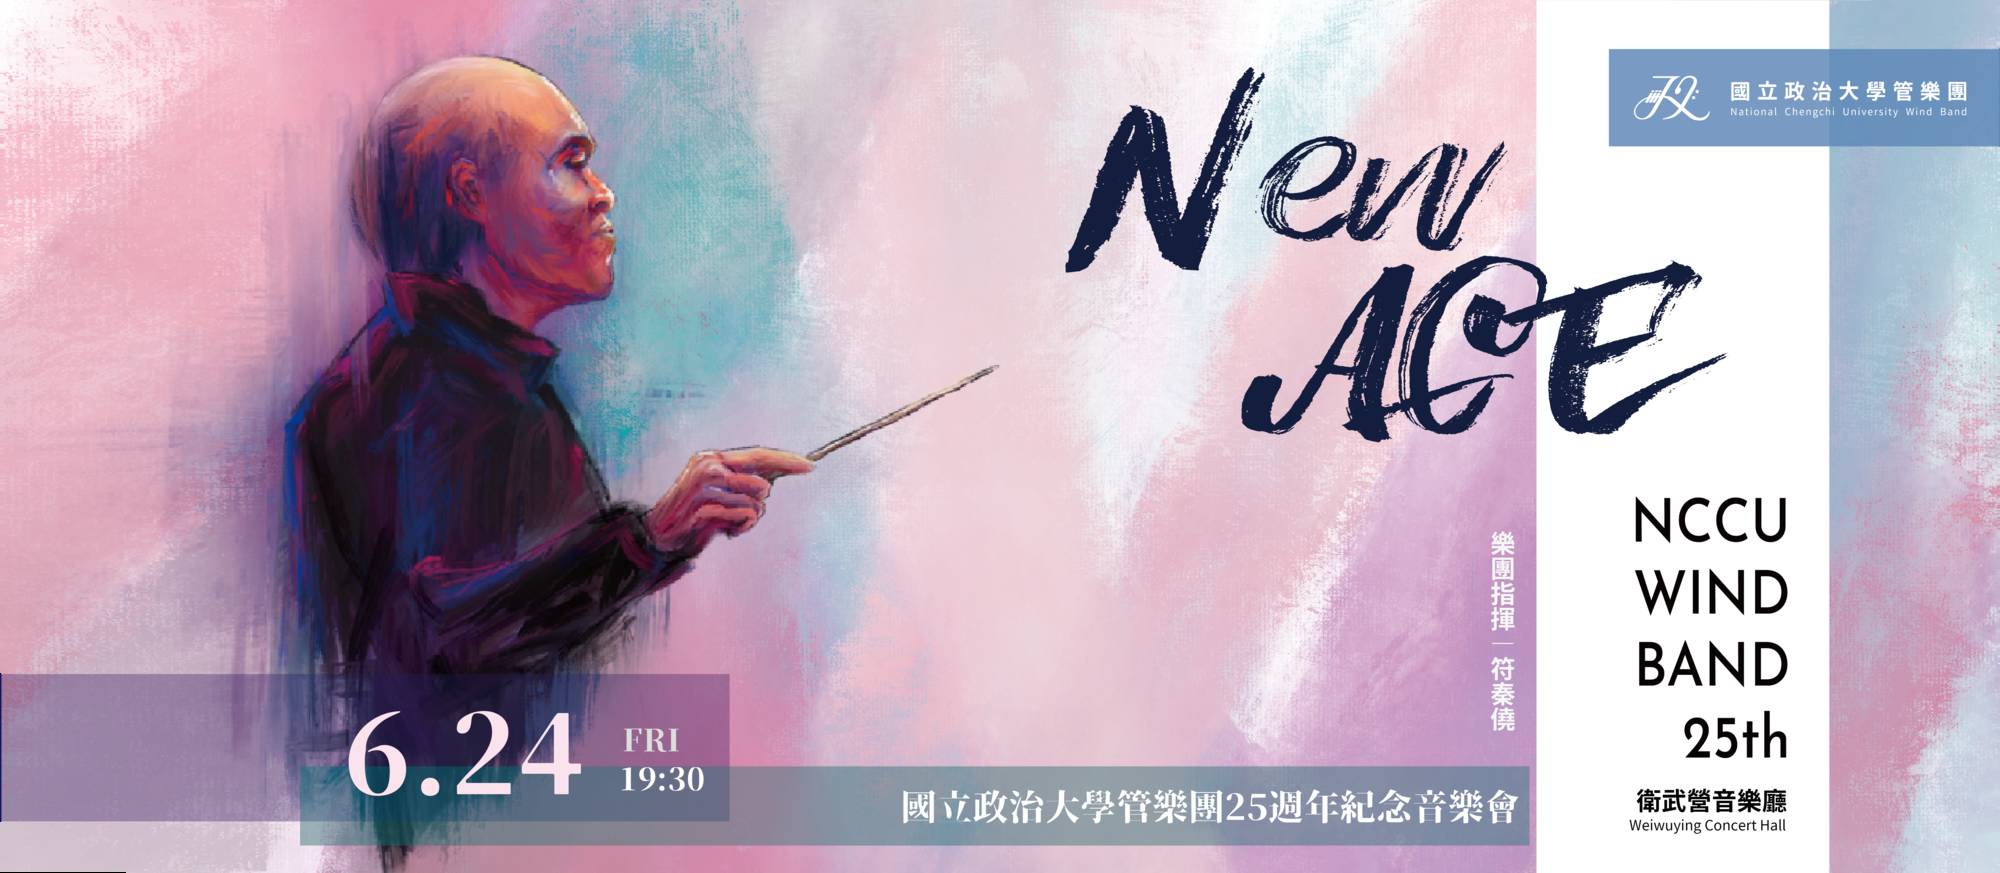 25th Anniversary Annual Concert of National Chengchi University Wind Band